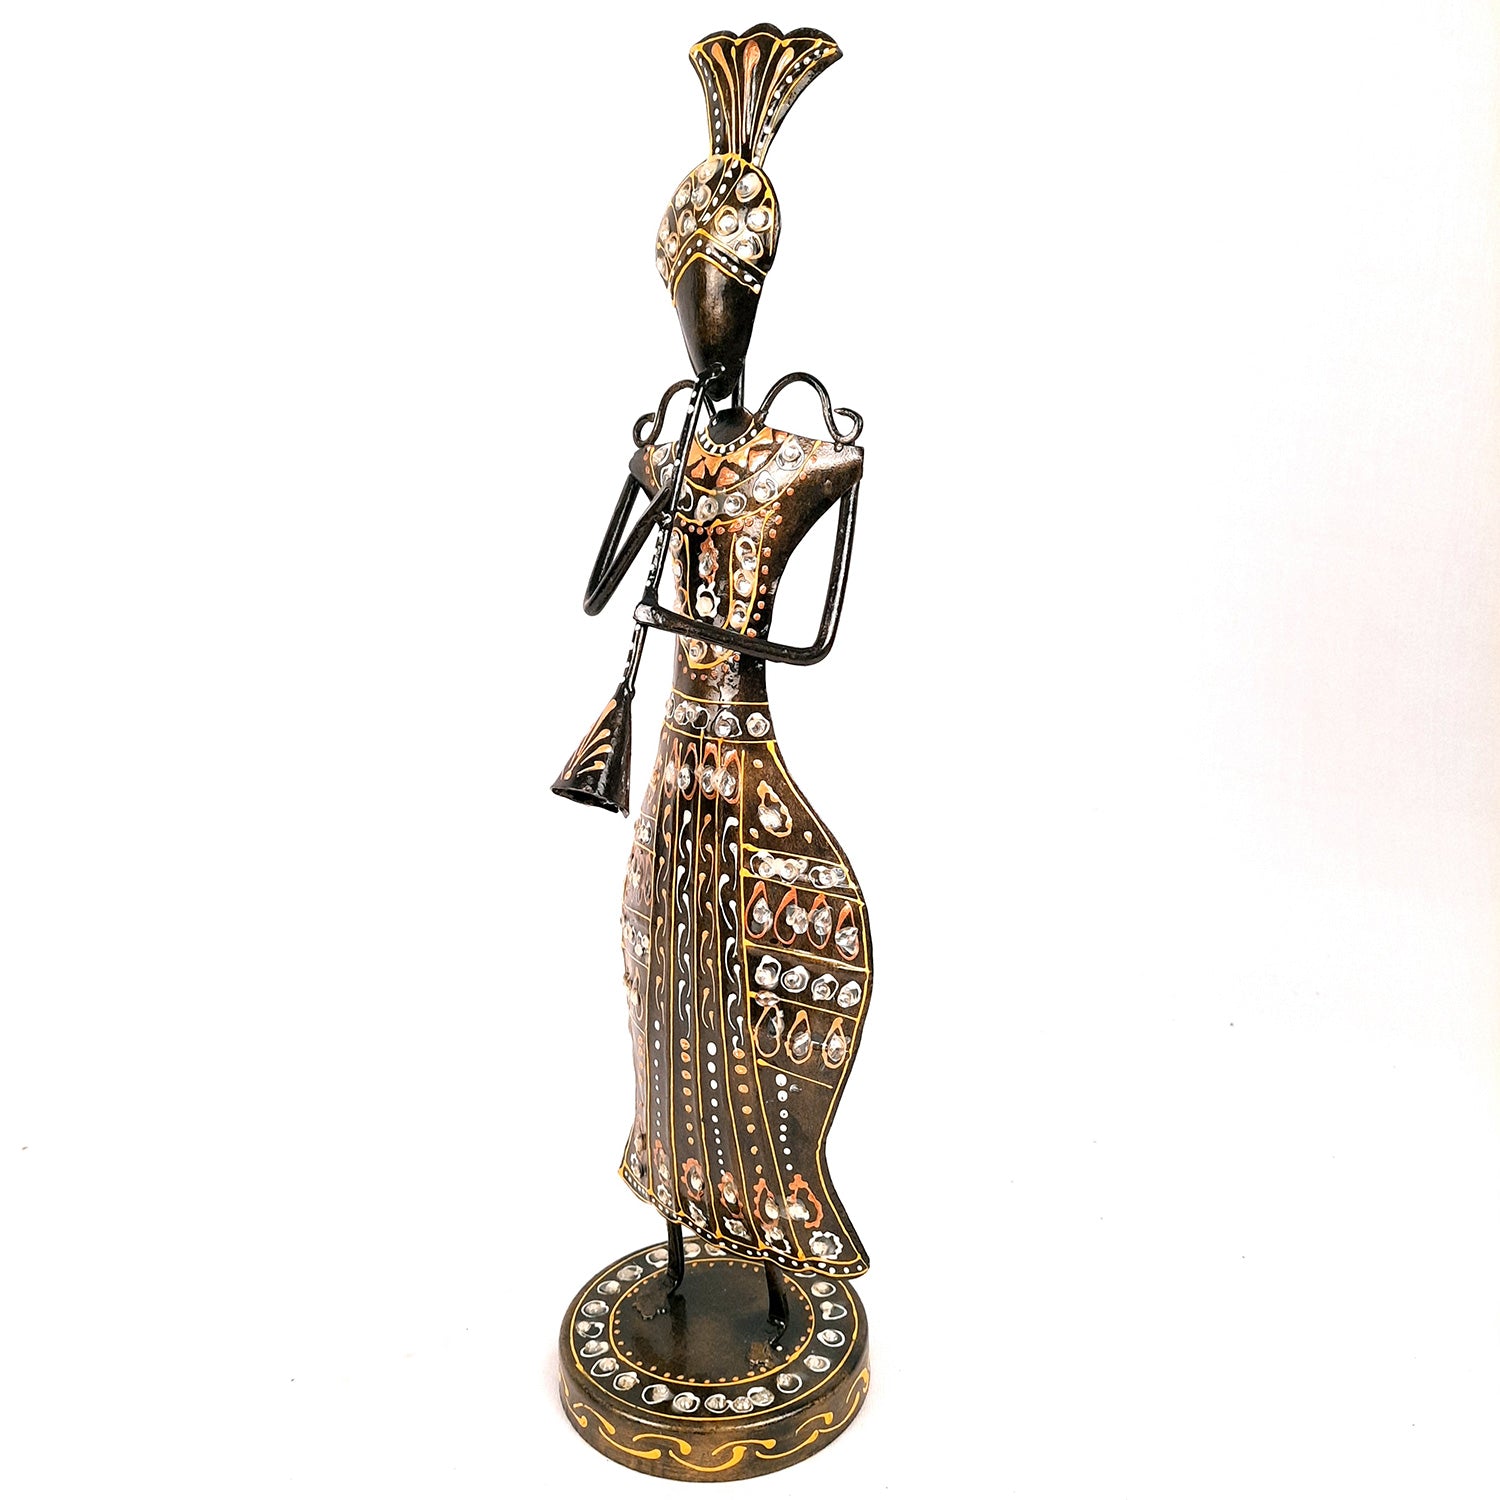 Showpiece Musician Playing Traditional Musical Instruments | Decorative Figurines - For Home, Table, Living Room & TV Unit | Show Piece For Office Desk & Gifts - 17 Inch (Set of 2) - Apkamart